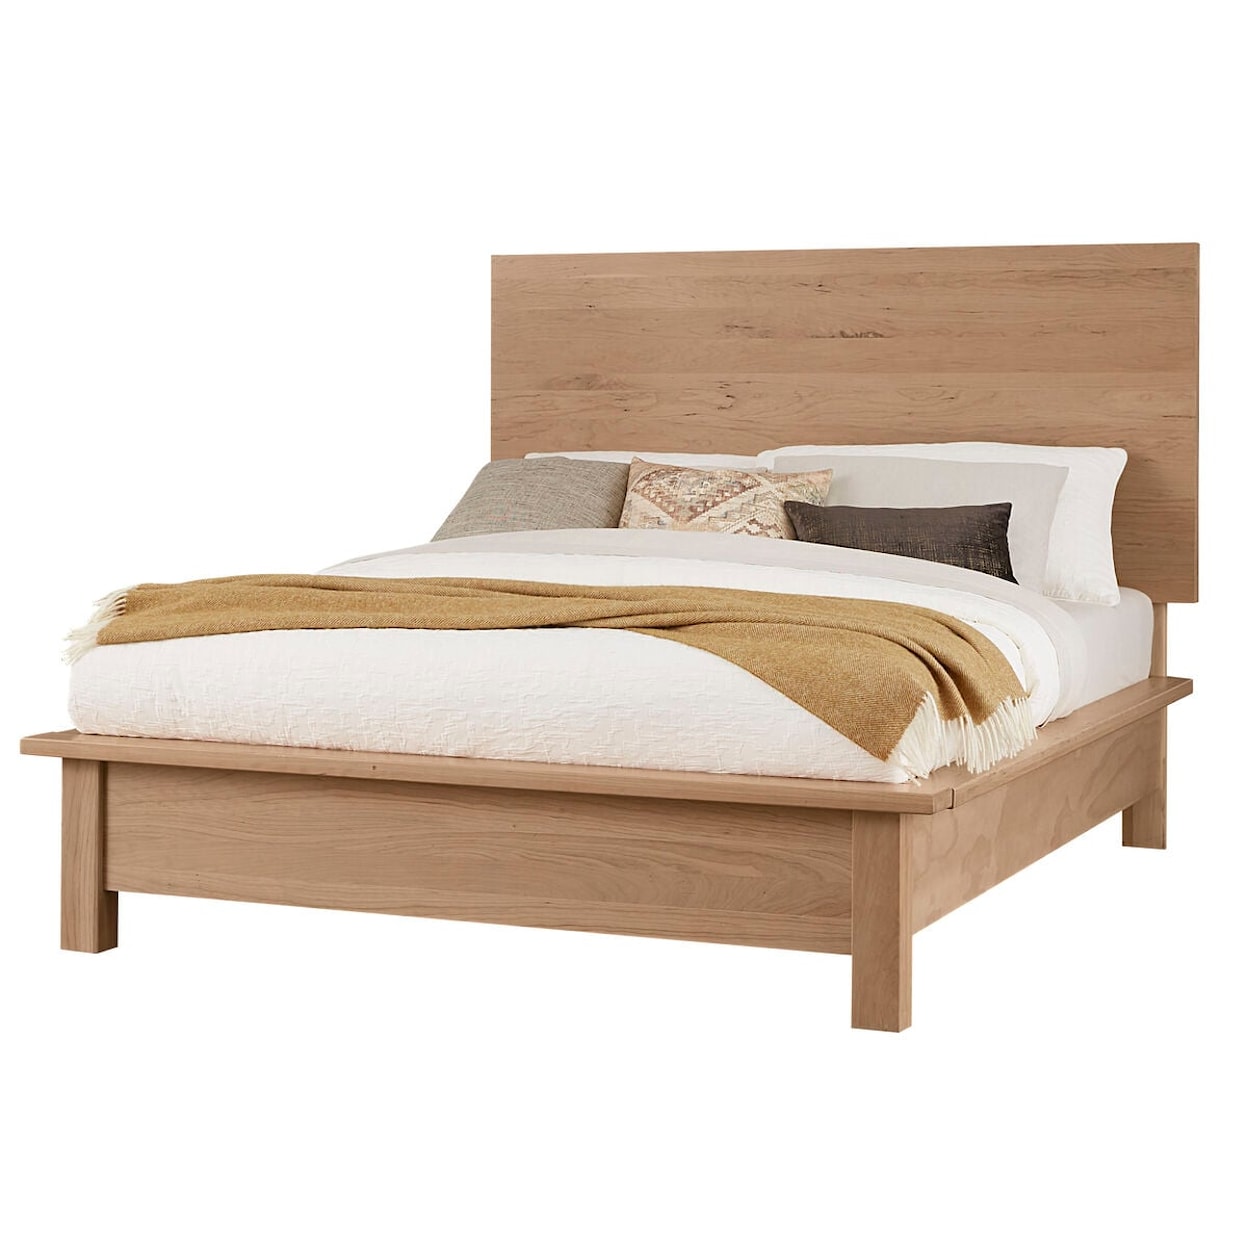 Vaughan Bassett Crafted Cherry - Bleached King Terrace Bed